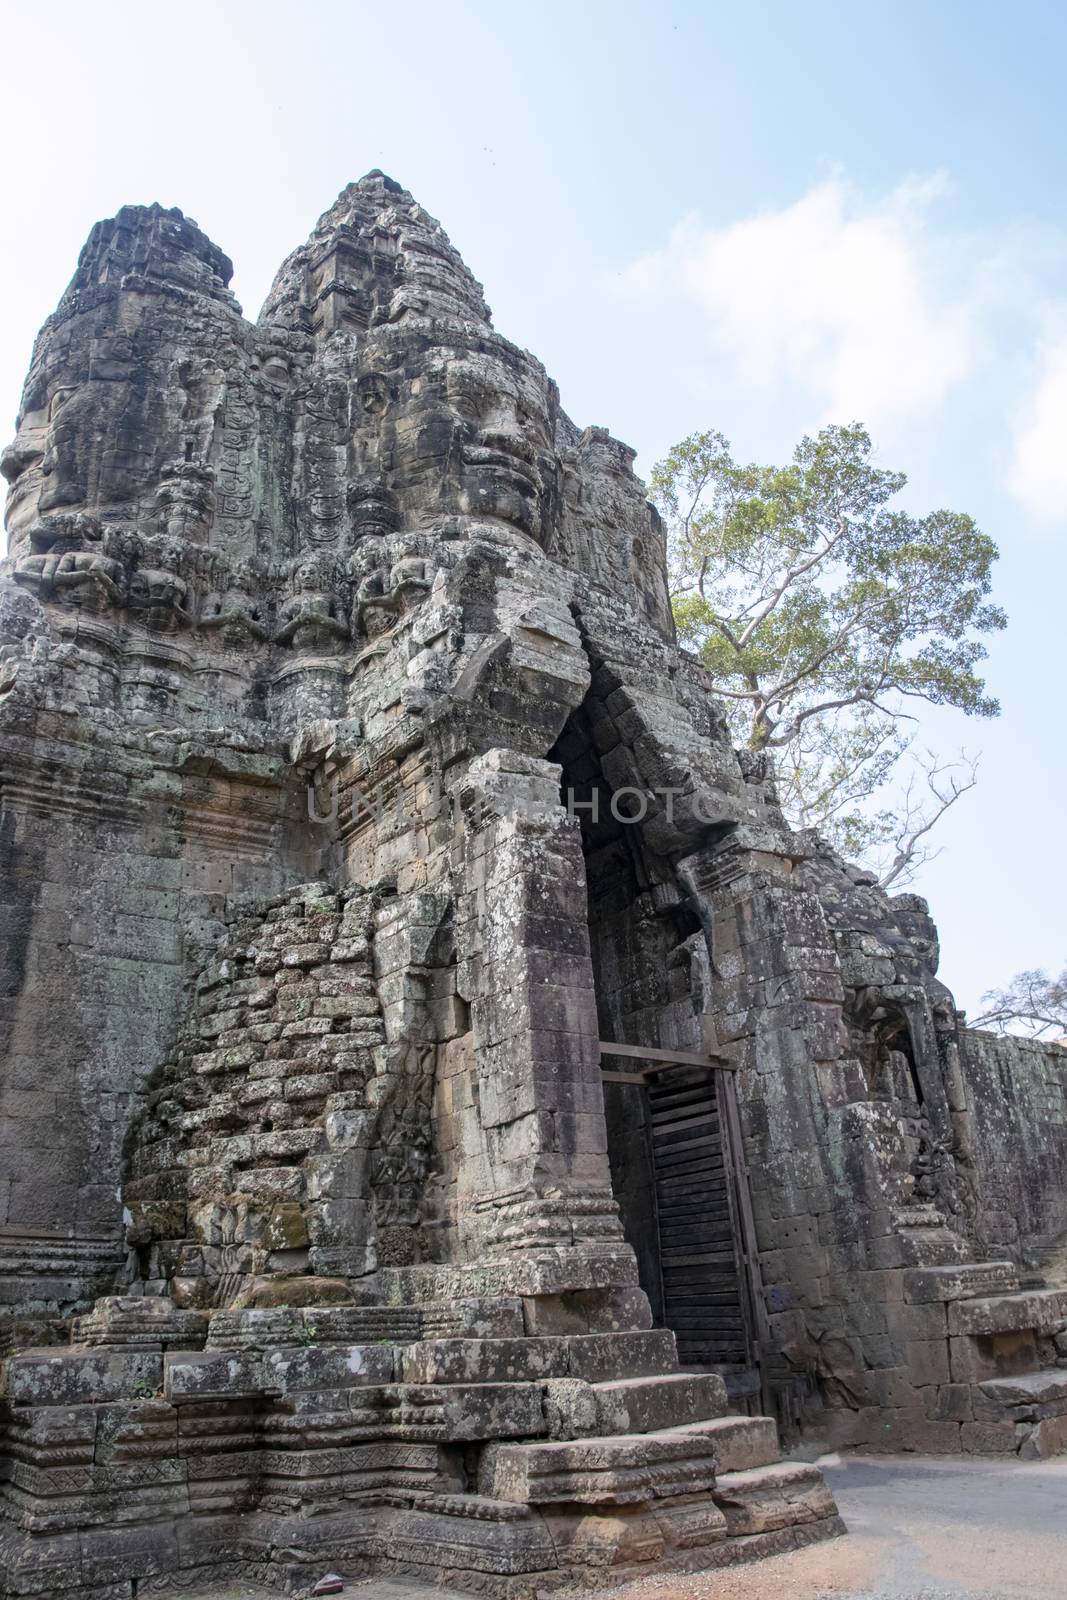 Cambodia, Bayon Temple - March 2016: The temple bridge is a main through road for traffic. Carved like the Bayon temple with a multitude of serene and smiling stone faces 